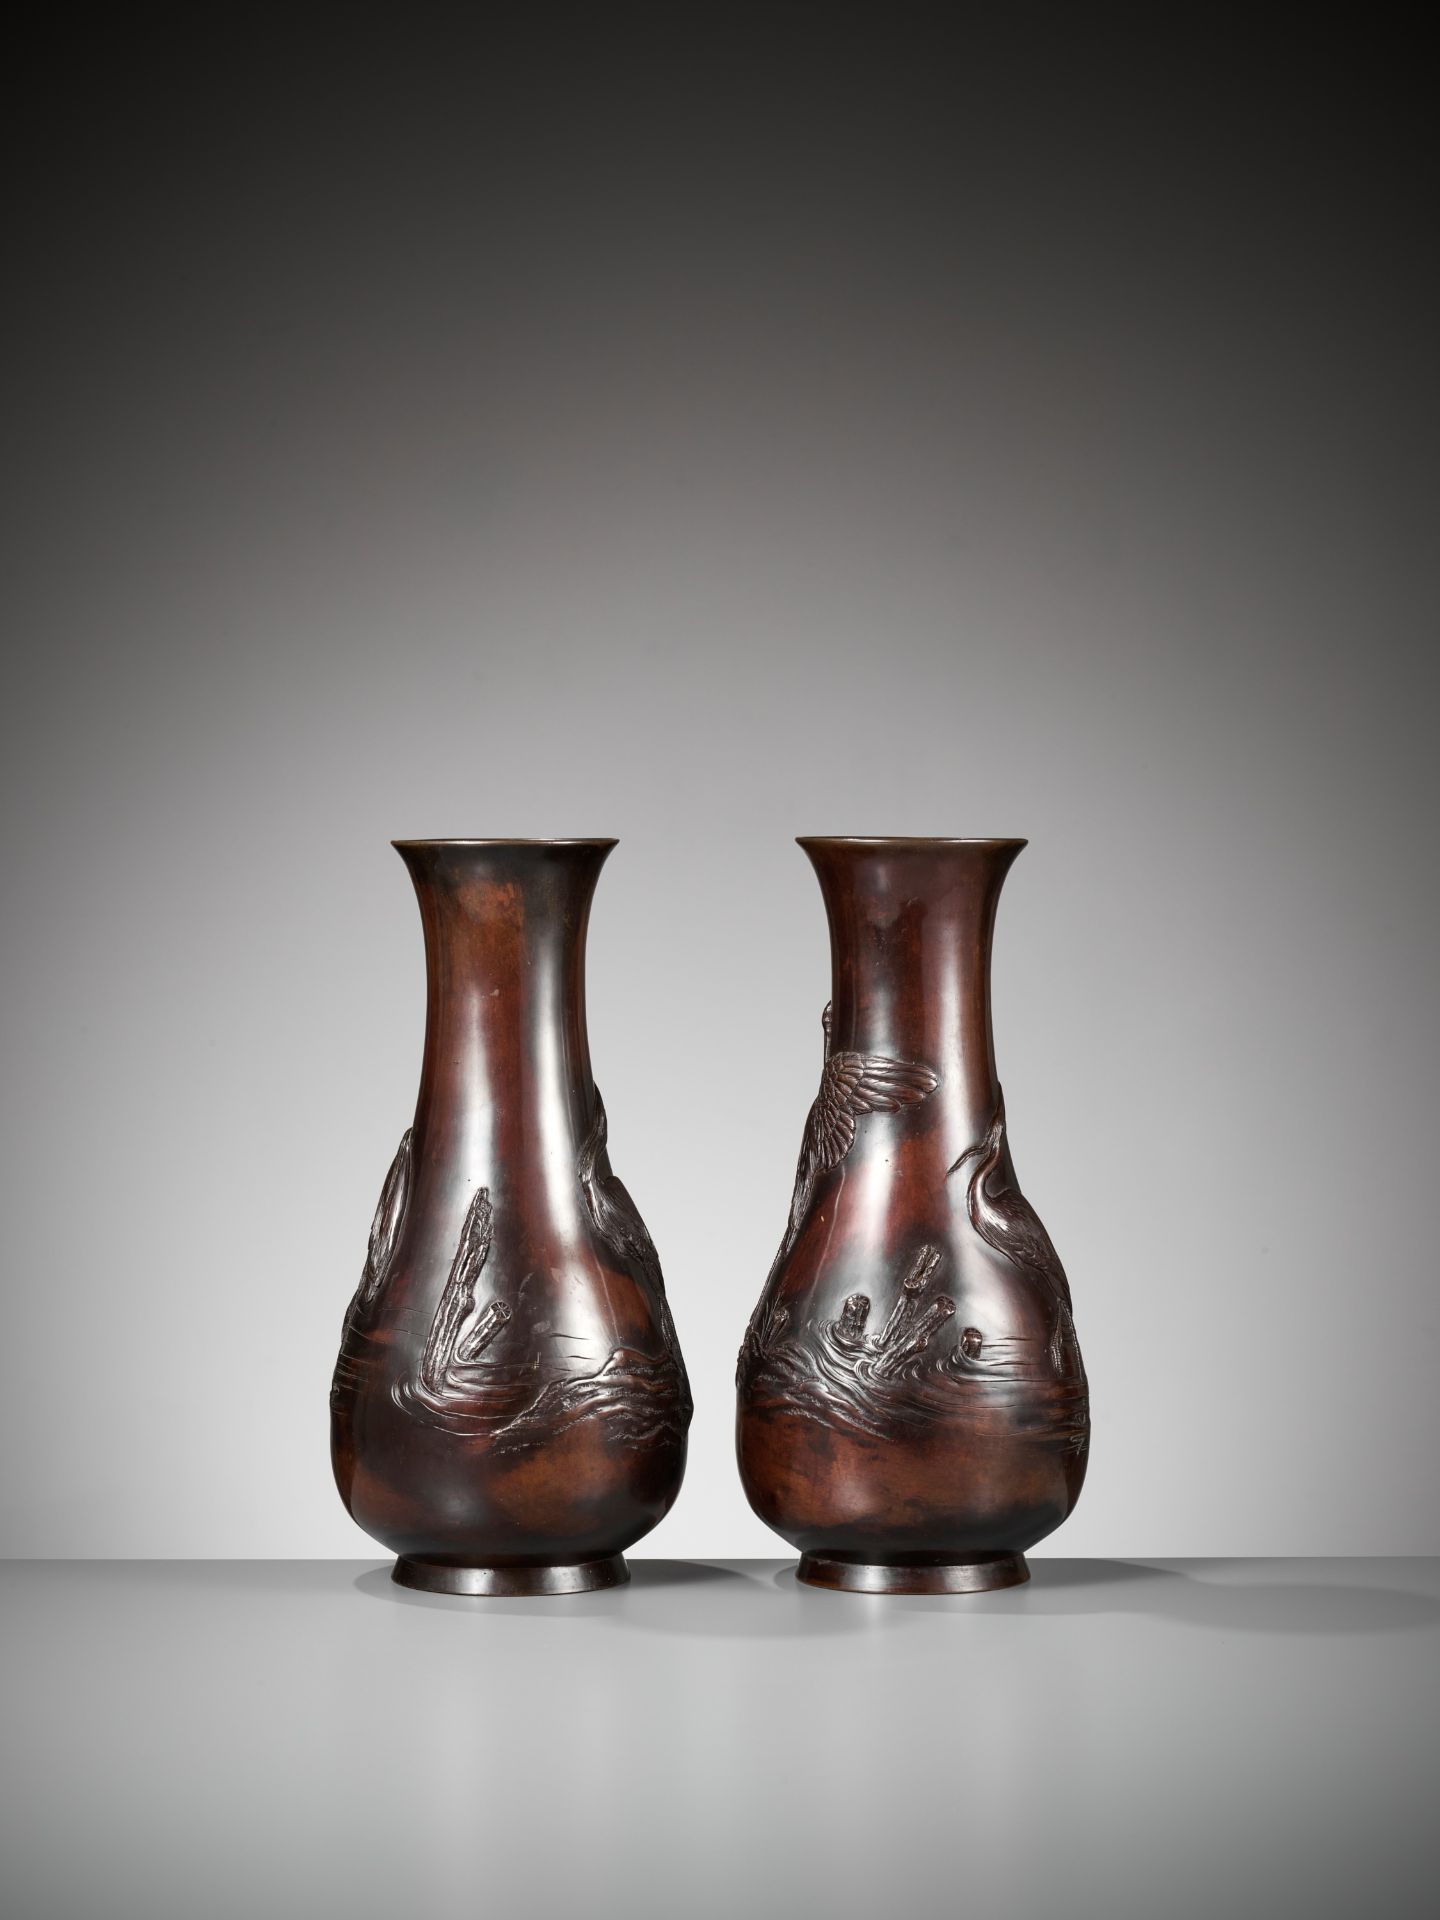 A PAIR OF BRONZE VASES DEPICTING EGRETS - Image 4 of 8